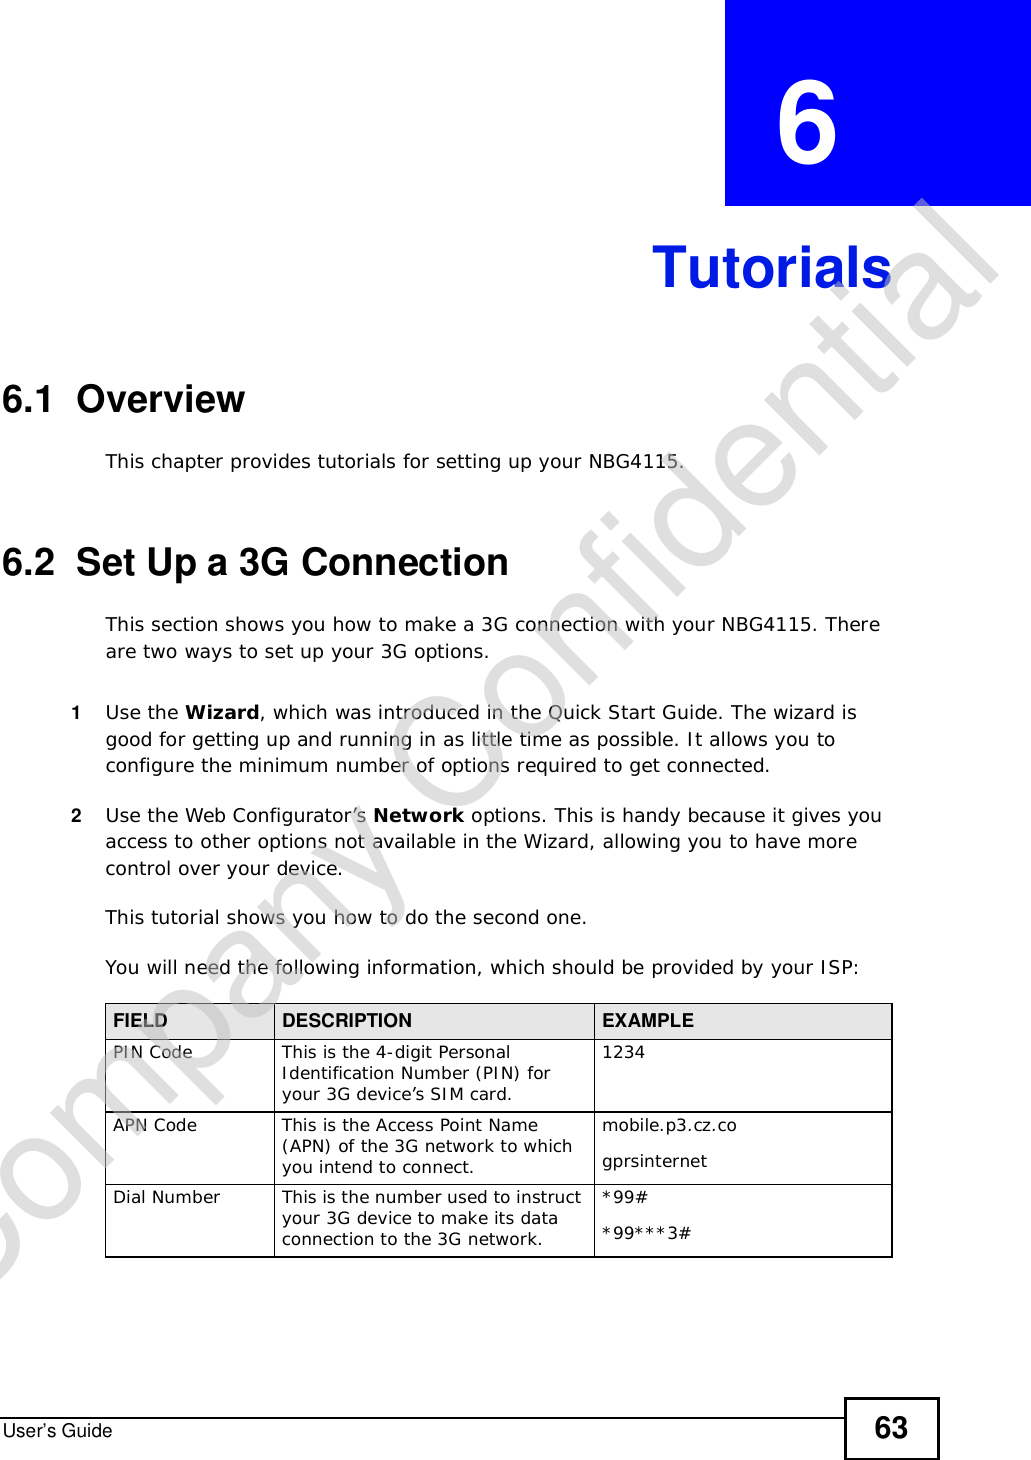 User’s Guide 63CHAPTER  6 Tutorials6.1  OverviewThis chapter provides tutorials for setting up your NBG4115.6.2  Set Up a 3G ConnectionThis section shows you how to make a 3G connection with your NBG4115. There are two ways to set up your 3G options.1Use the Wizard, which was introduced in the Quick Start Guide. The wizard is good for getting up and running in as little time as possible. It allows you to configure the minimum number of options required to get connected.2Use the Web Configurator’s Network options. This is handy because it gives you access to other options not available in the Wizard, allowing you to have more control over your device.This tutorial shows you how to do the second one. You will need the following information, which should be provided by your ISP:FIELD DESCRIPTION EXAMPLEPIN CodeThis is the 4-digit Personal Identification Number (PIN) for your 3G device’s SIM card.1234APN CodeThis is the Access Point Name (APN) of the 3G network to which you intend to connect.mobile.p3.cz.cogprsinternetDial NumberThis is the number used to instruct your 3G device to make its data connection to the 3G network.*99#*99***3#Company Confidential